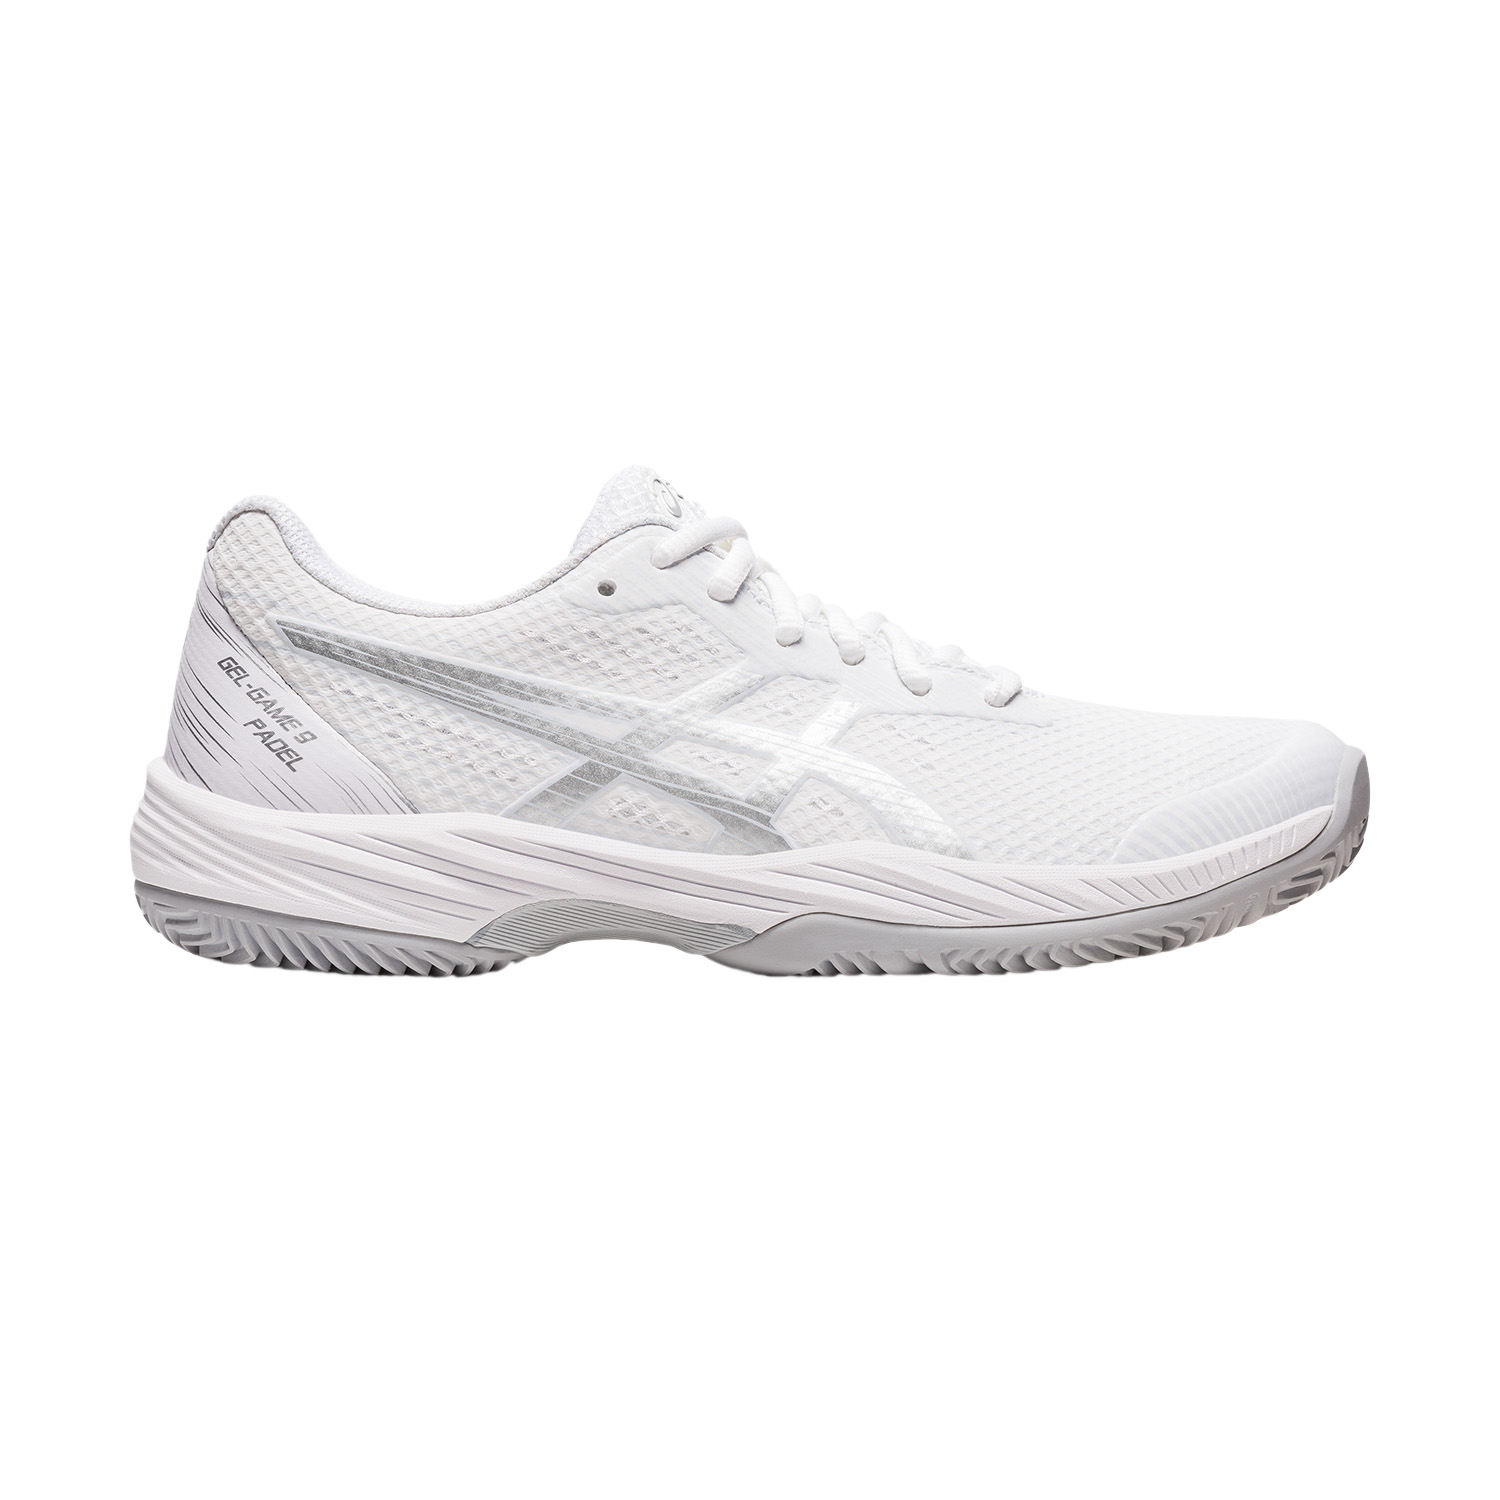 Asics Gel Game 9 Padel Women's Tennis Shoes - White/Pure Silver